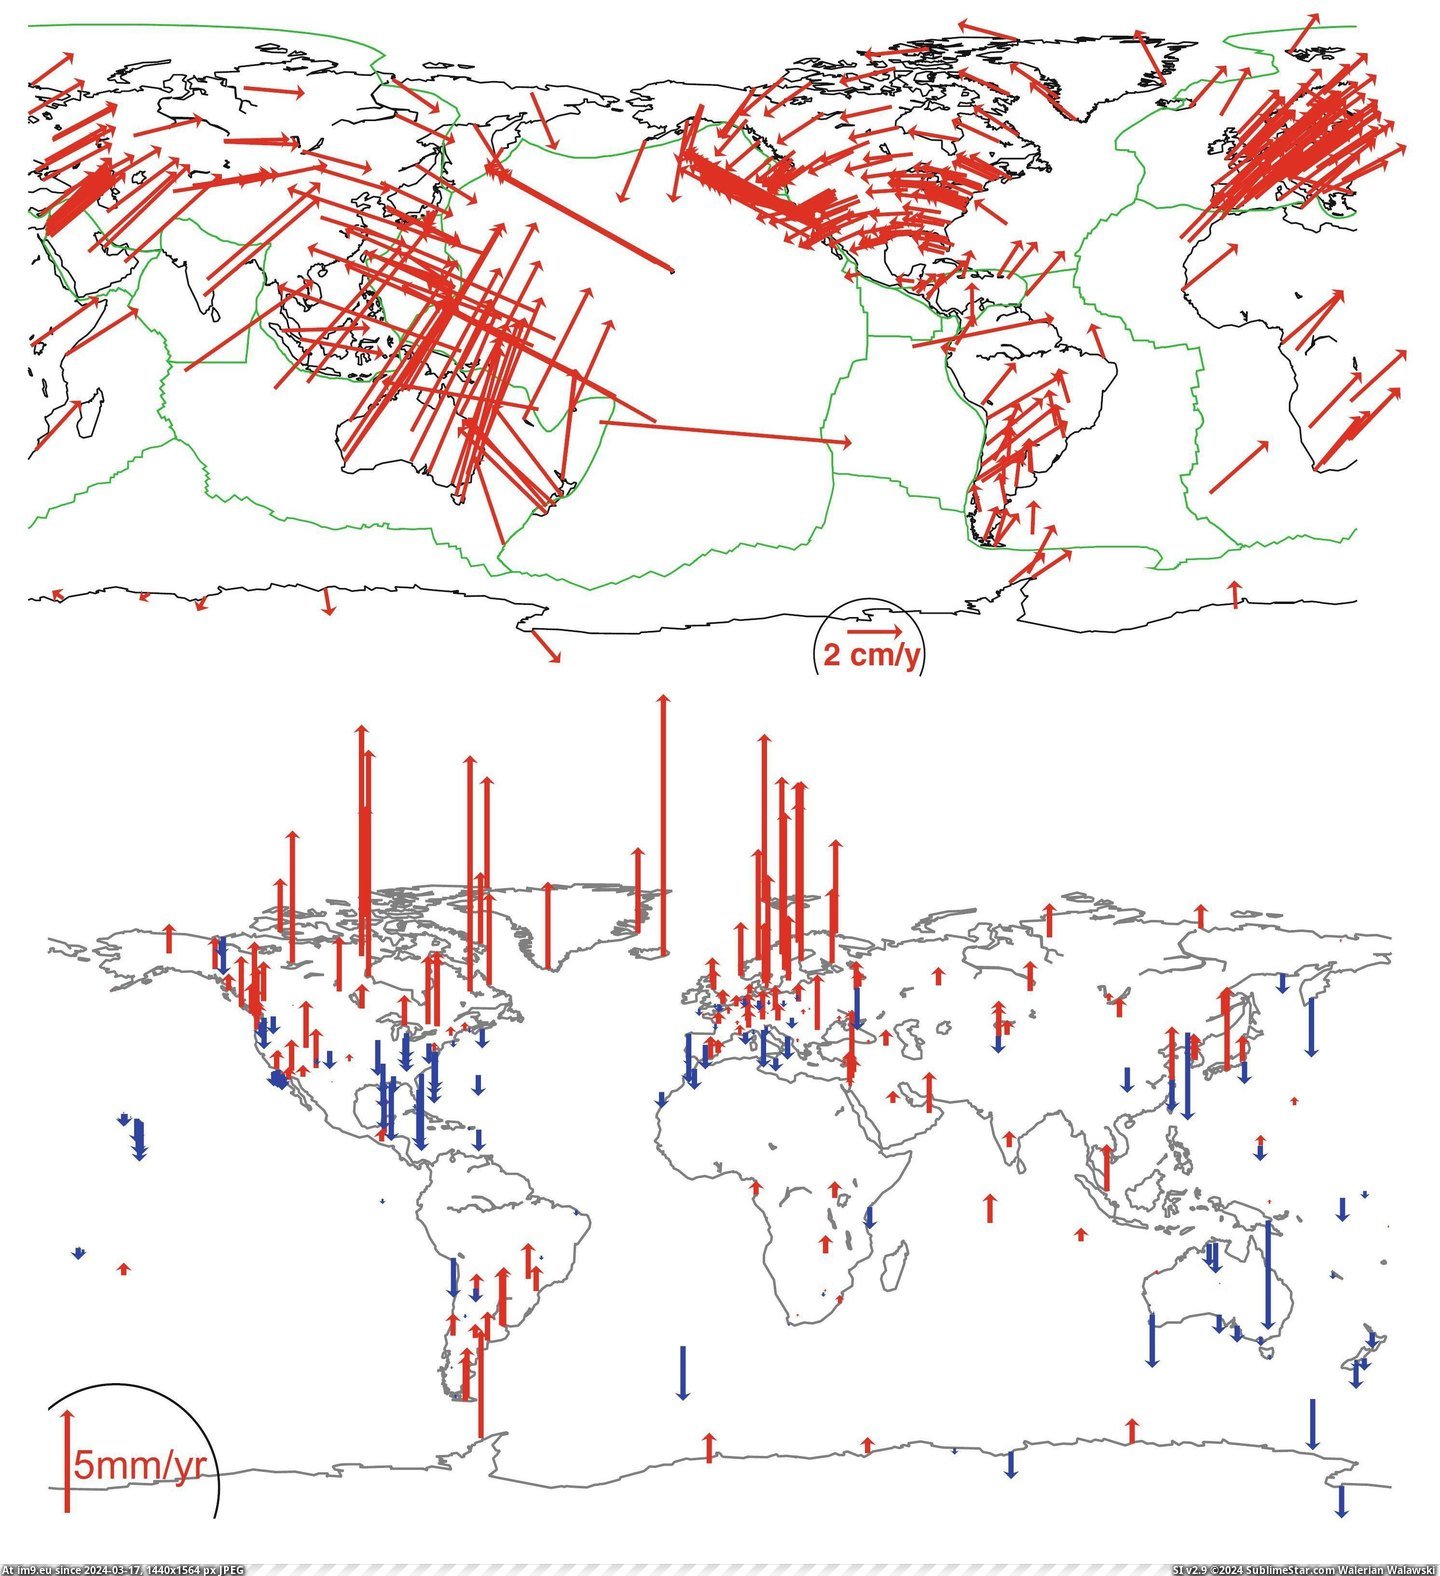 #Earth #Info #Horizontal #Reference #Points #Vertical [Mapporn] Horizontal and vertical velocities of Earth's reference points (OS and info in comments) [2985x3254] Pic. (Image of album My r/MAPS favs))